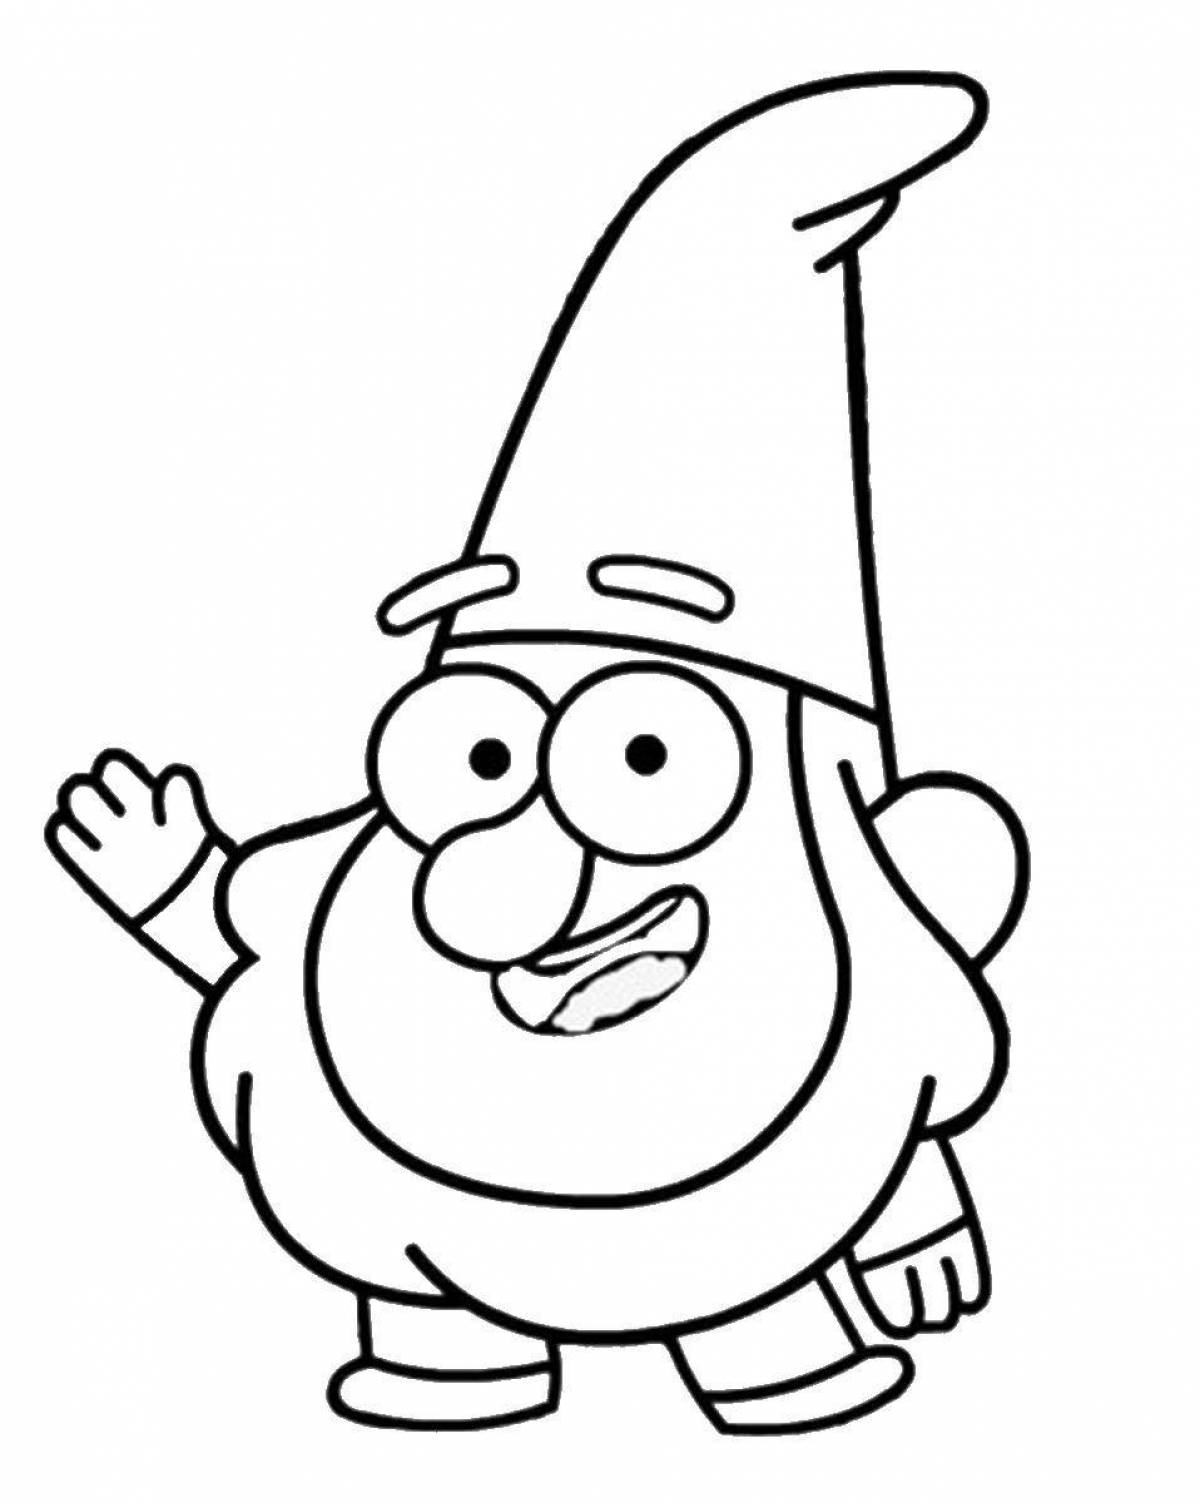 Charming gravity falls sous coloring page